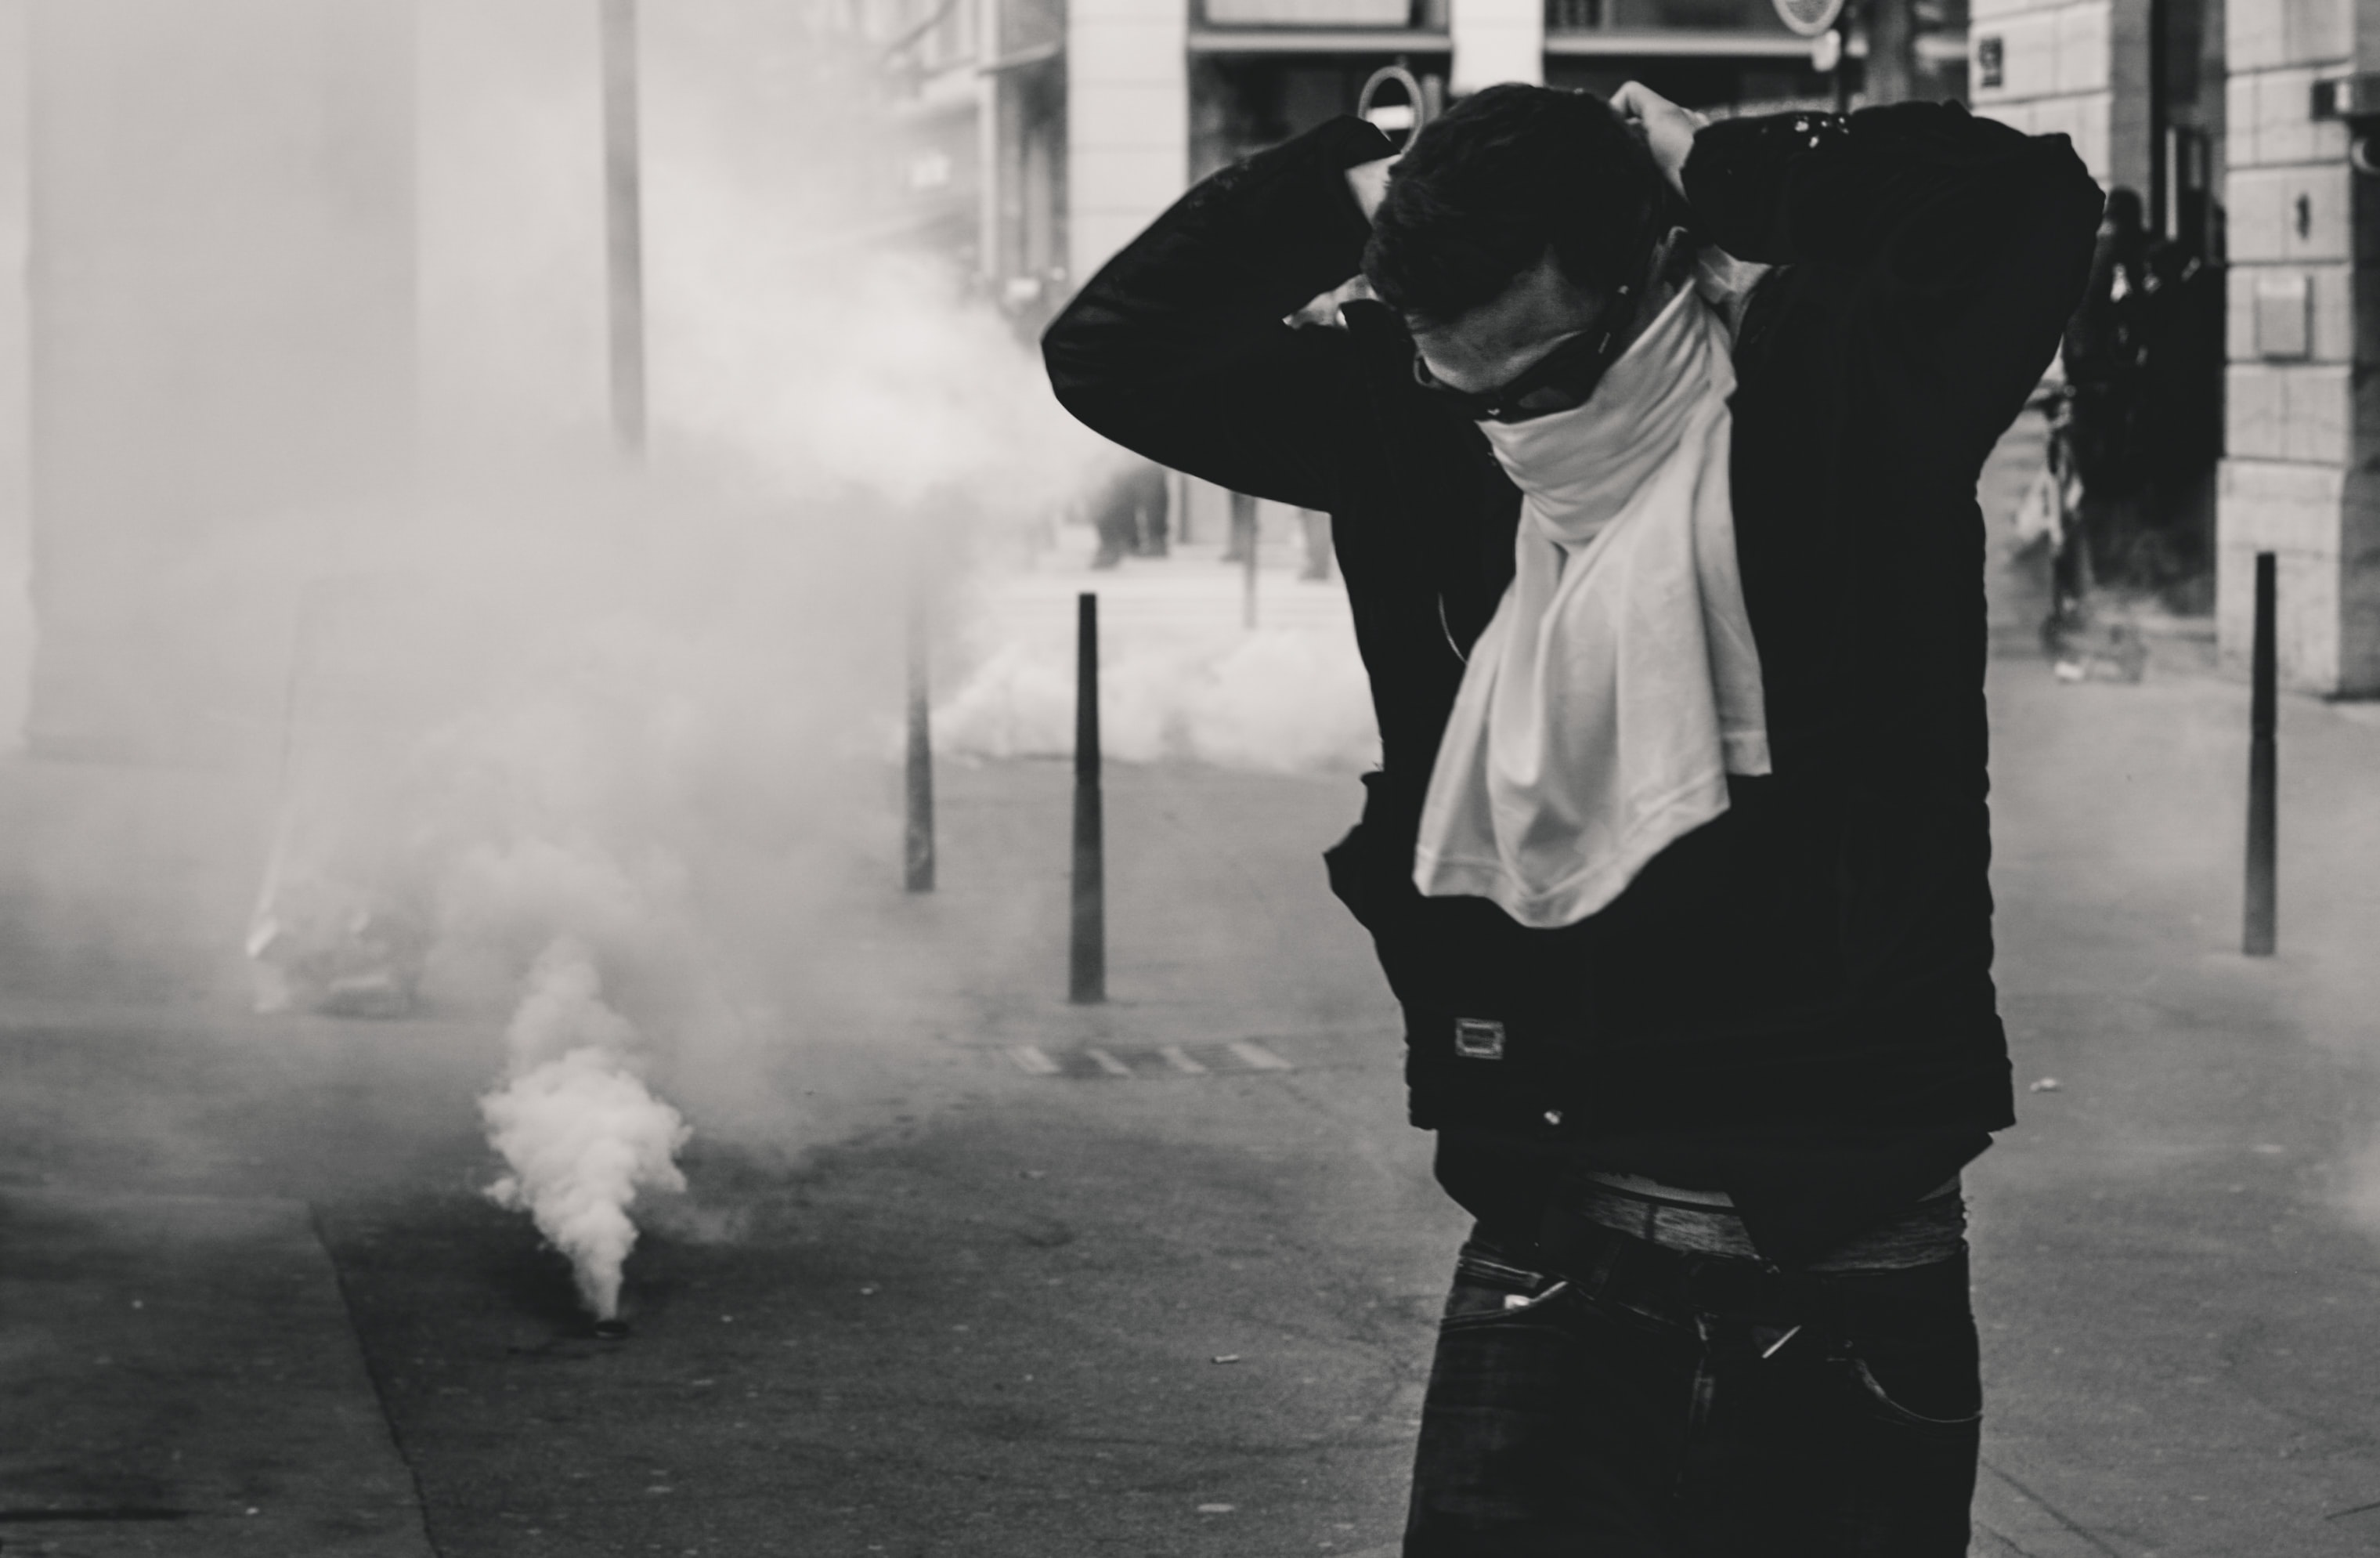 Police fires tear gas grenades on protestors on the streets of Lyon, France, during the 25th weekend of Yellow Vest protests. Image by Ev, via Unsplash.com.